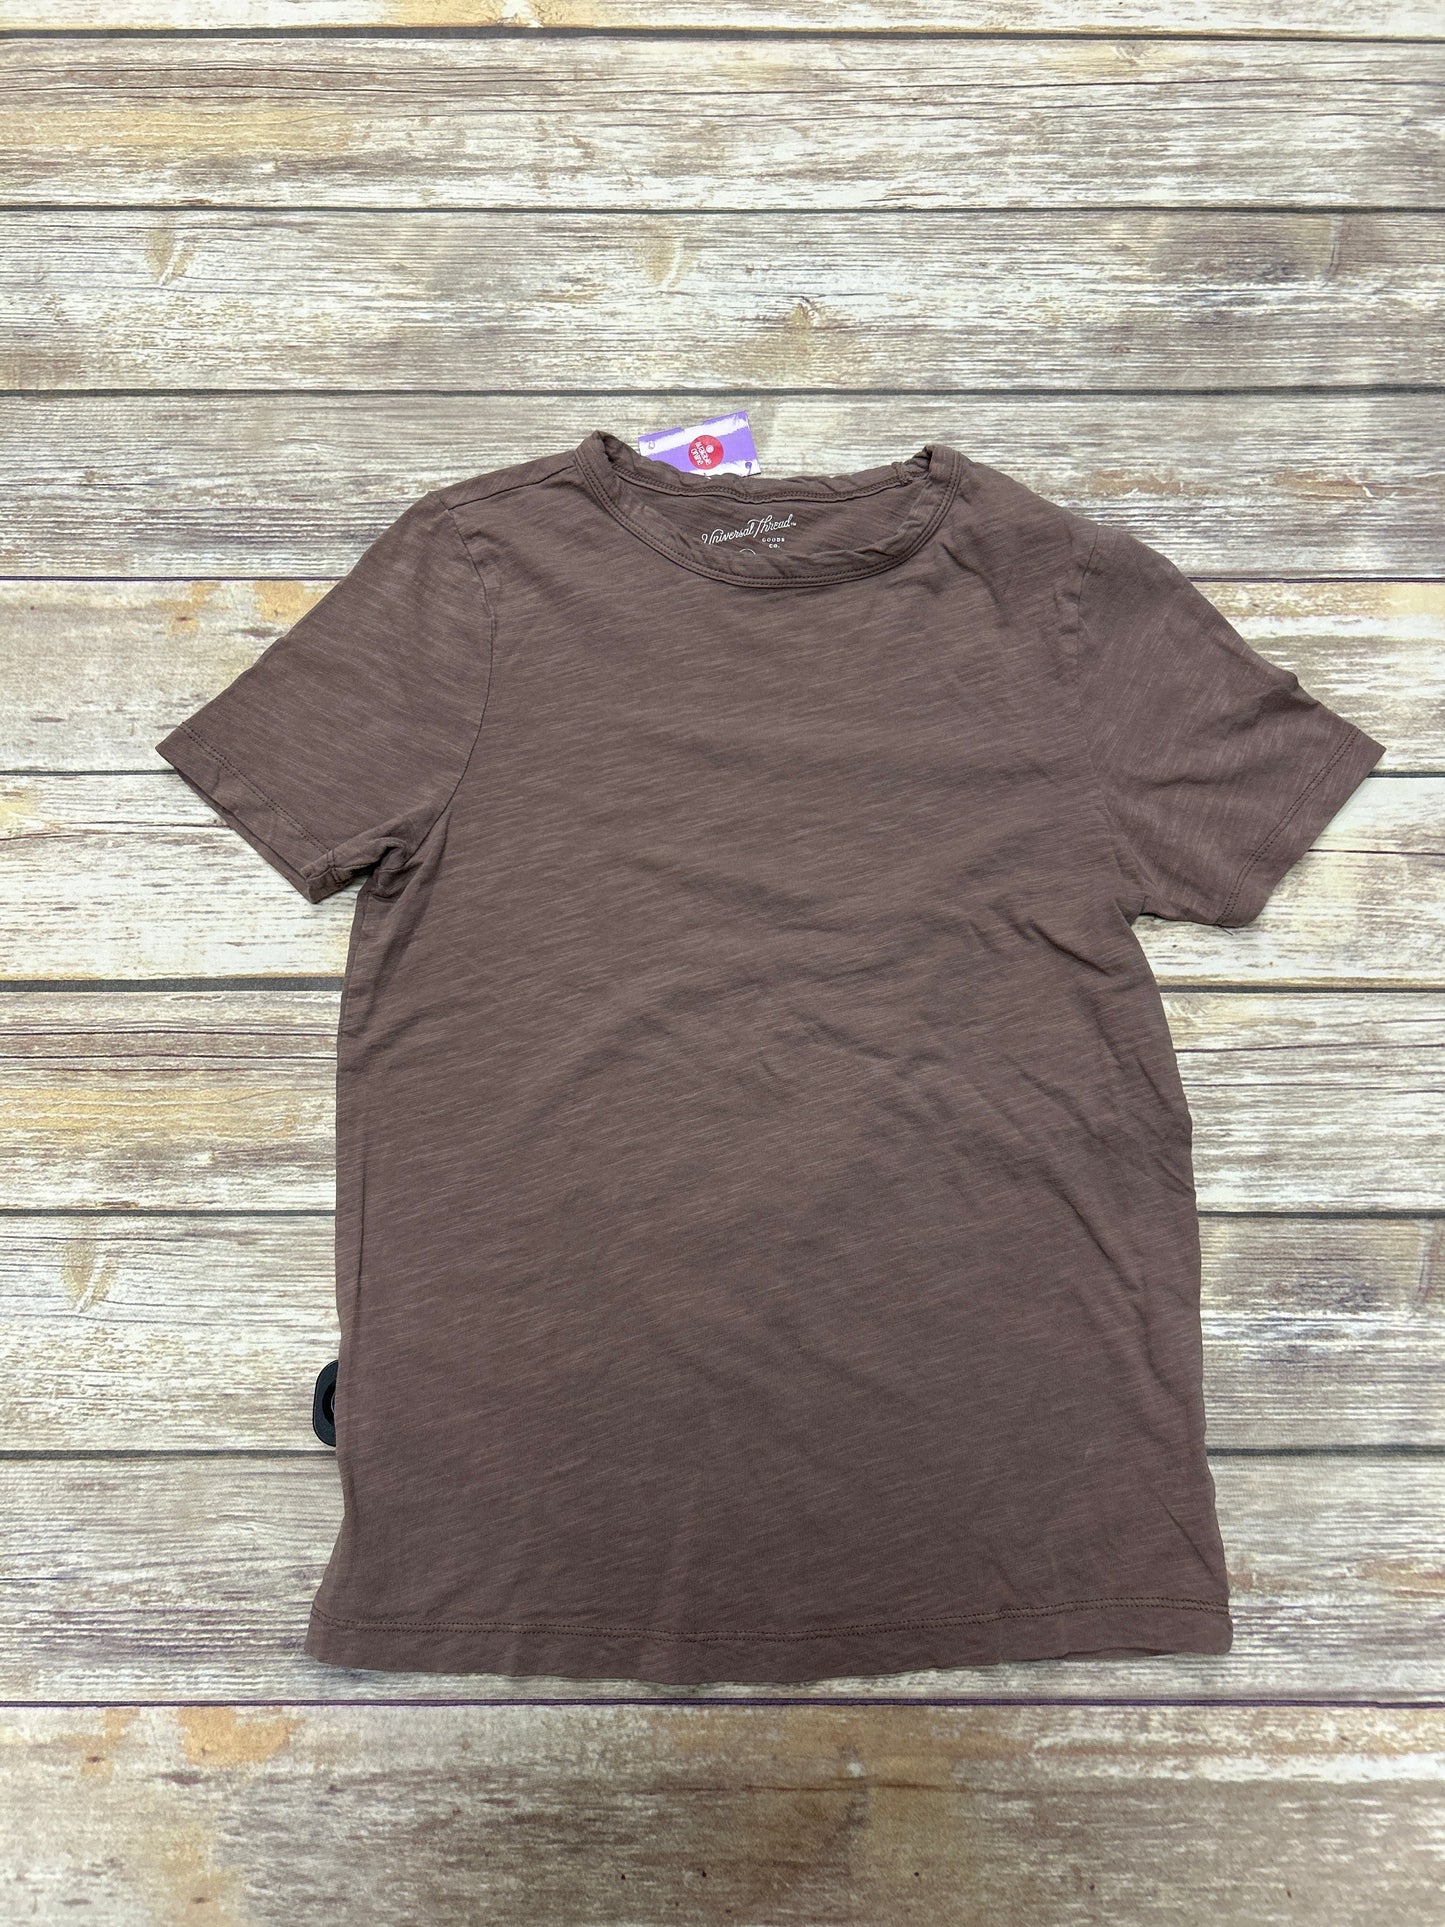 Brown Top Short Sleeve Universal Thread, Size Xs